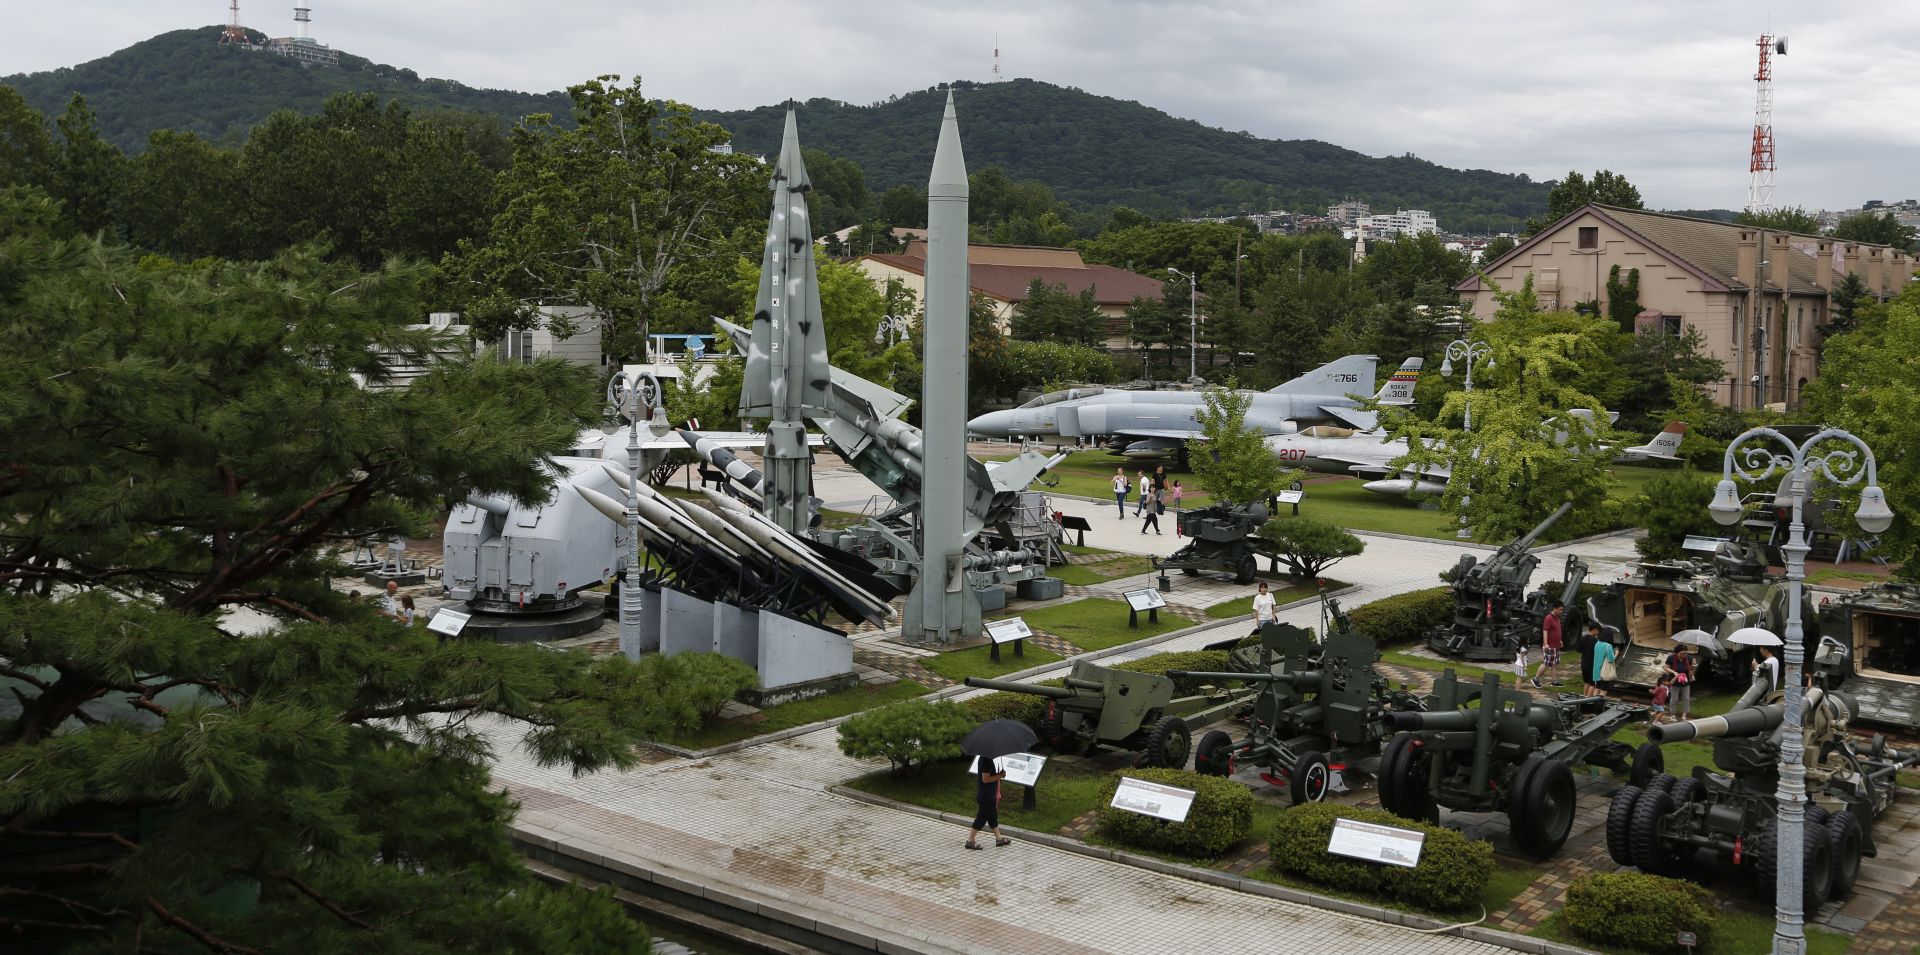 epa07749488 Peoples look at a North Korean Scud-B Tactical Ballistic Missile (C) on display at the Korean War Memorial Museum in Seoul, South Korea, 31 July 2019. According to South Korea's Joint Chiefs of Staff (JCS), North Korea fired two short-range missiles toward the East Sea from the Kalma area near the North's eastern port of Wonsan on 31 July.  EPA/JEON HEON-KYUN